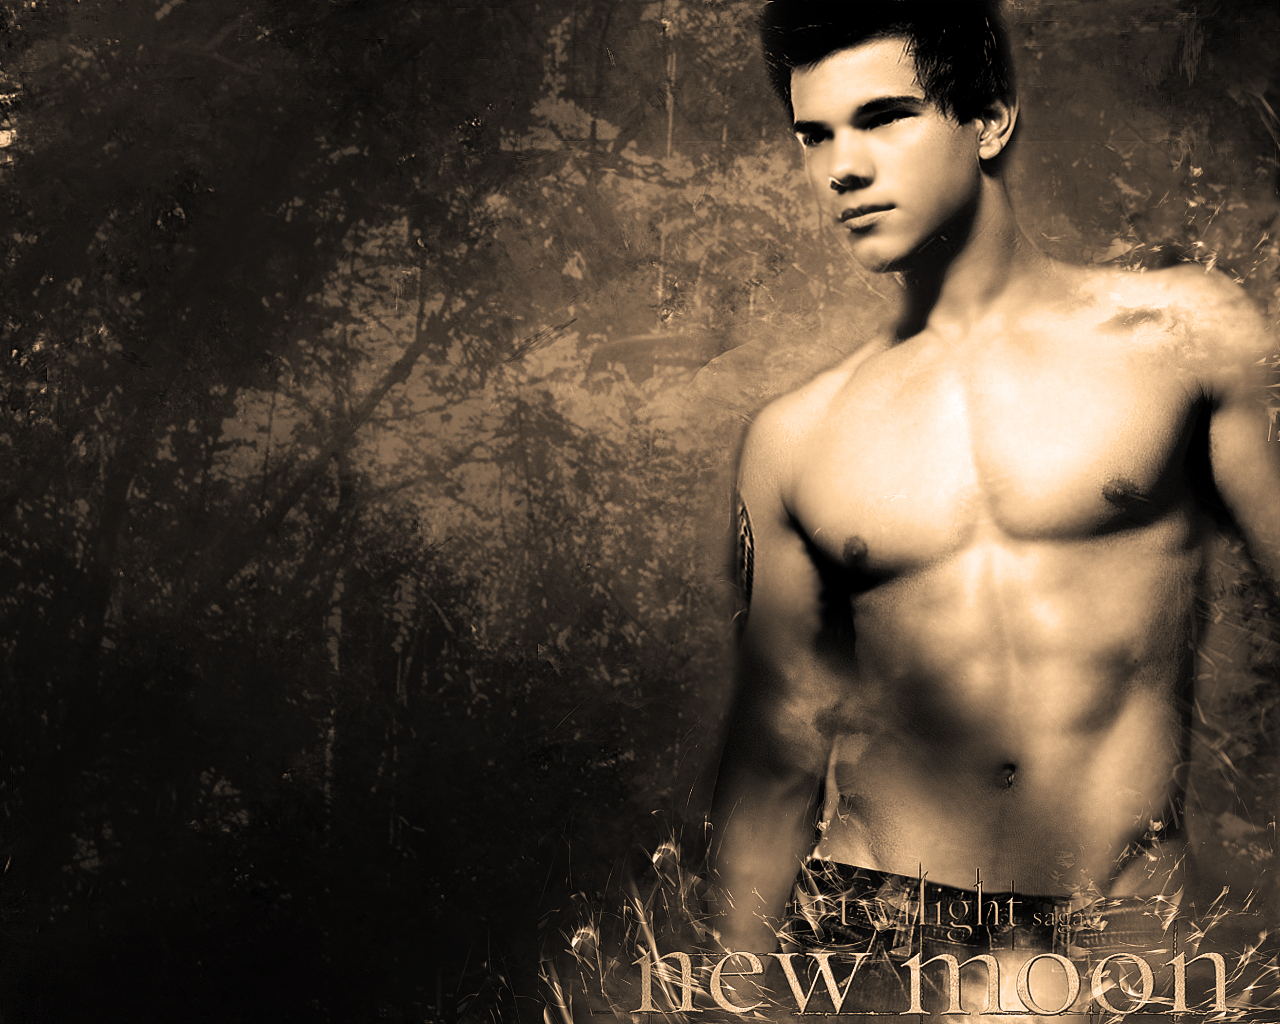 Taylor Lautner Shirt Off New Moon Wallpaper Image Pictures Becuo